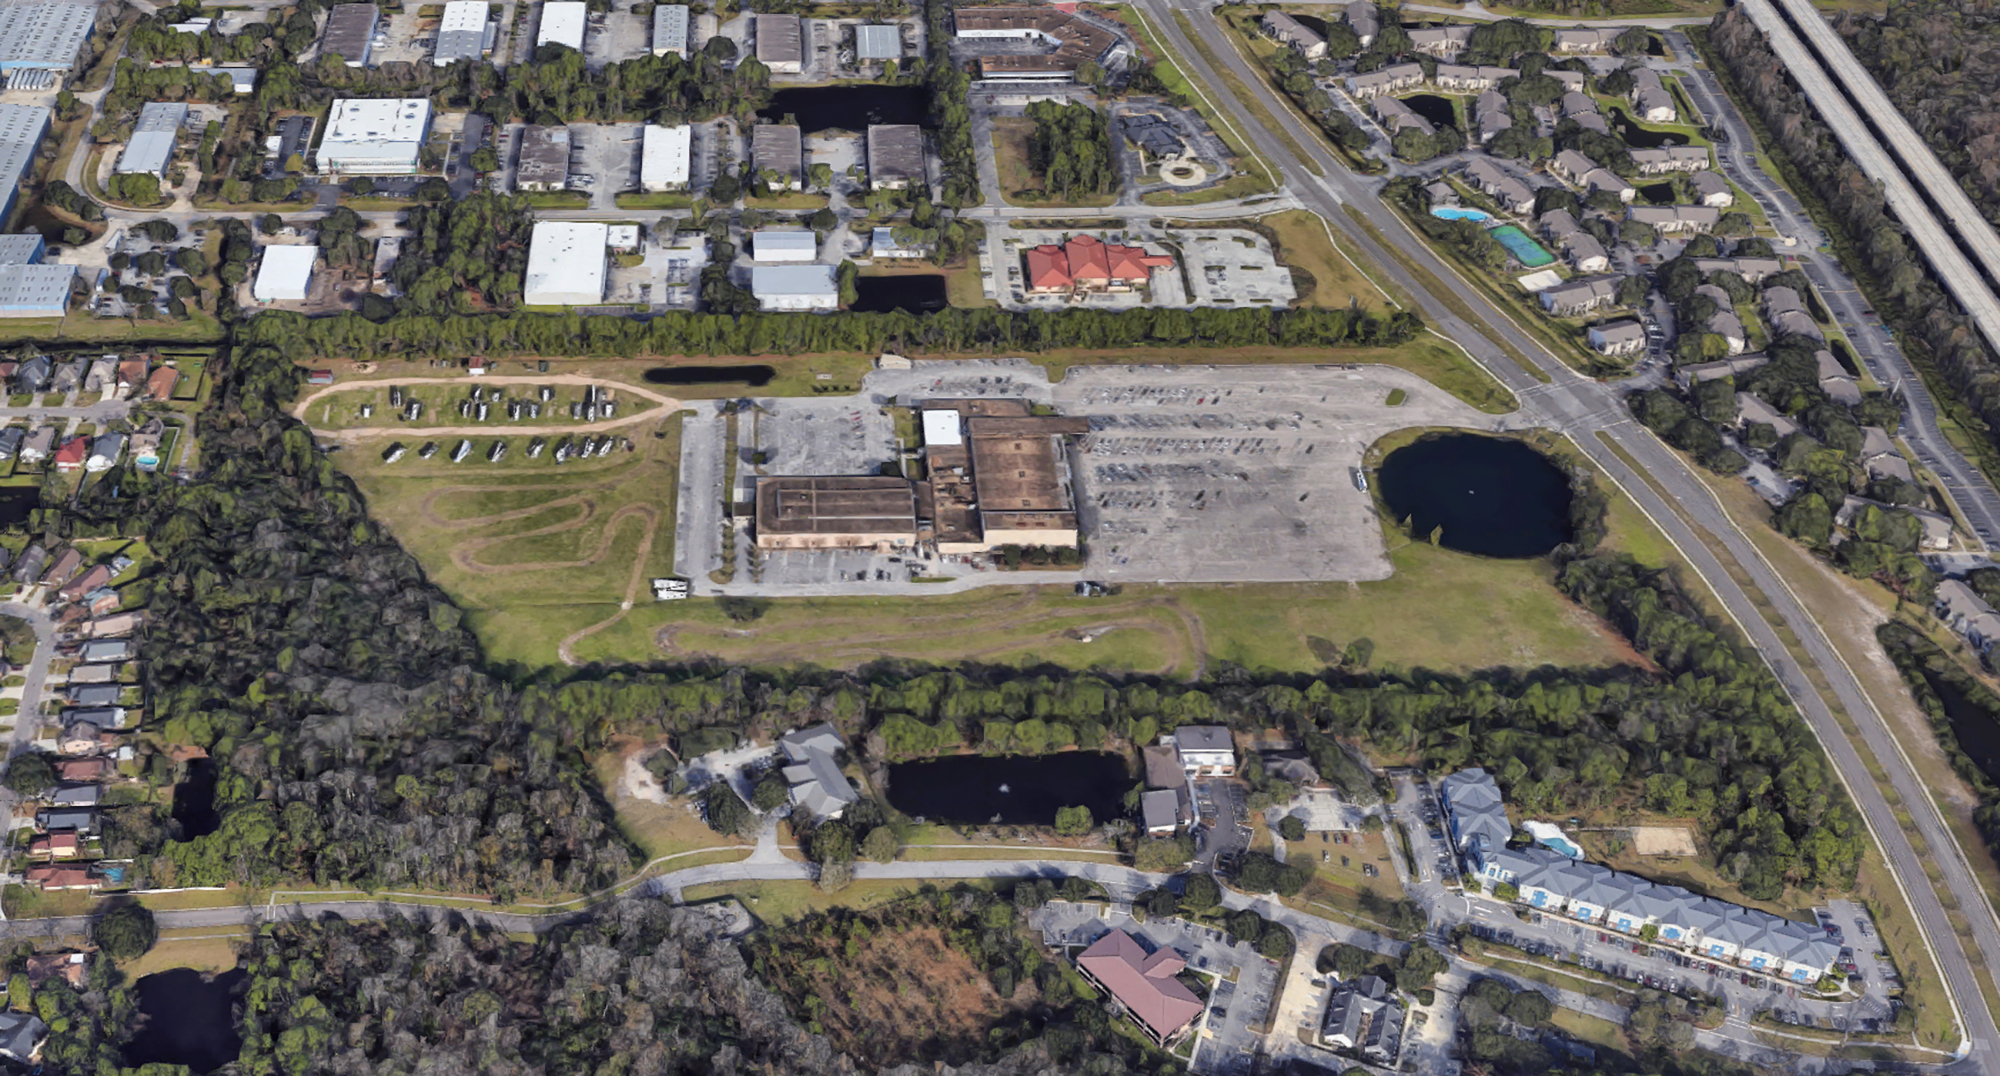 The property comprises 37 acres at 3800 St. Johns Bluff Road S. (Google)